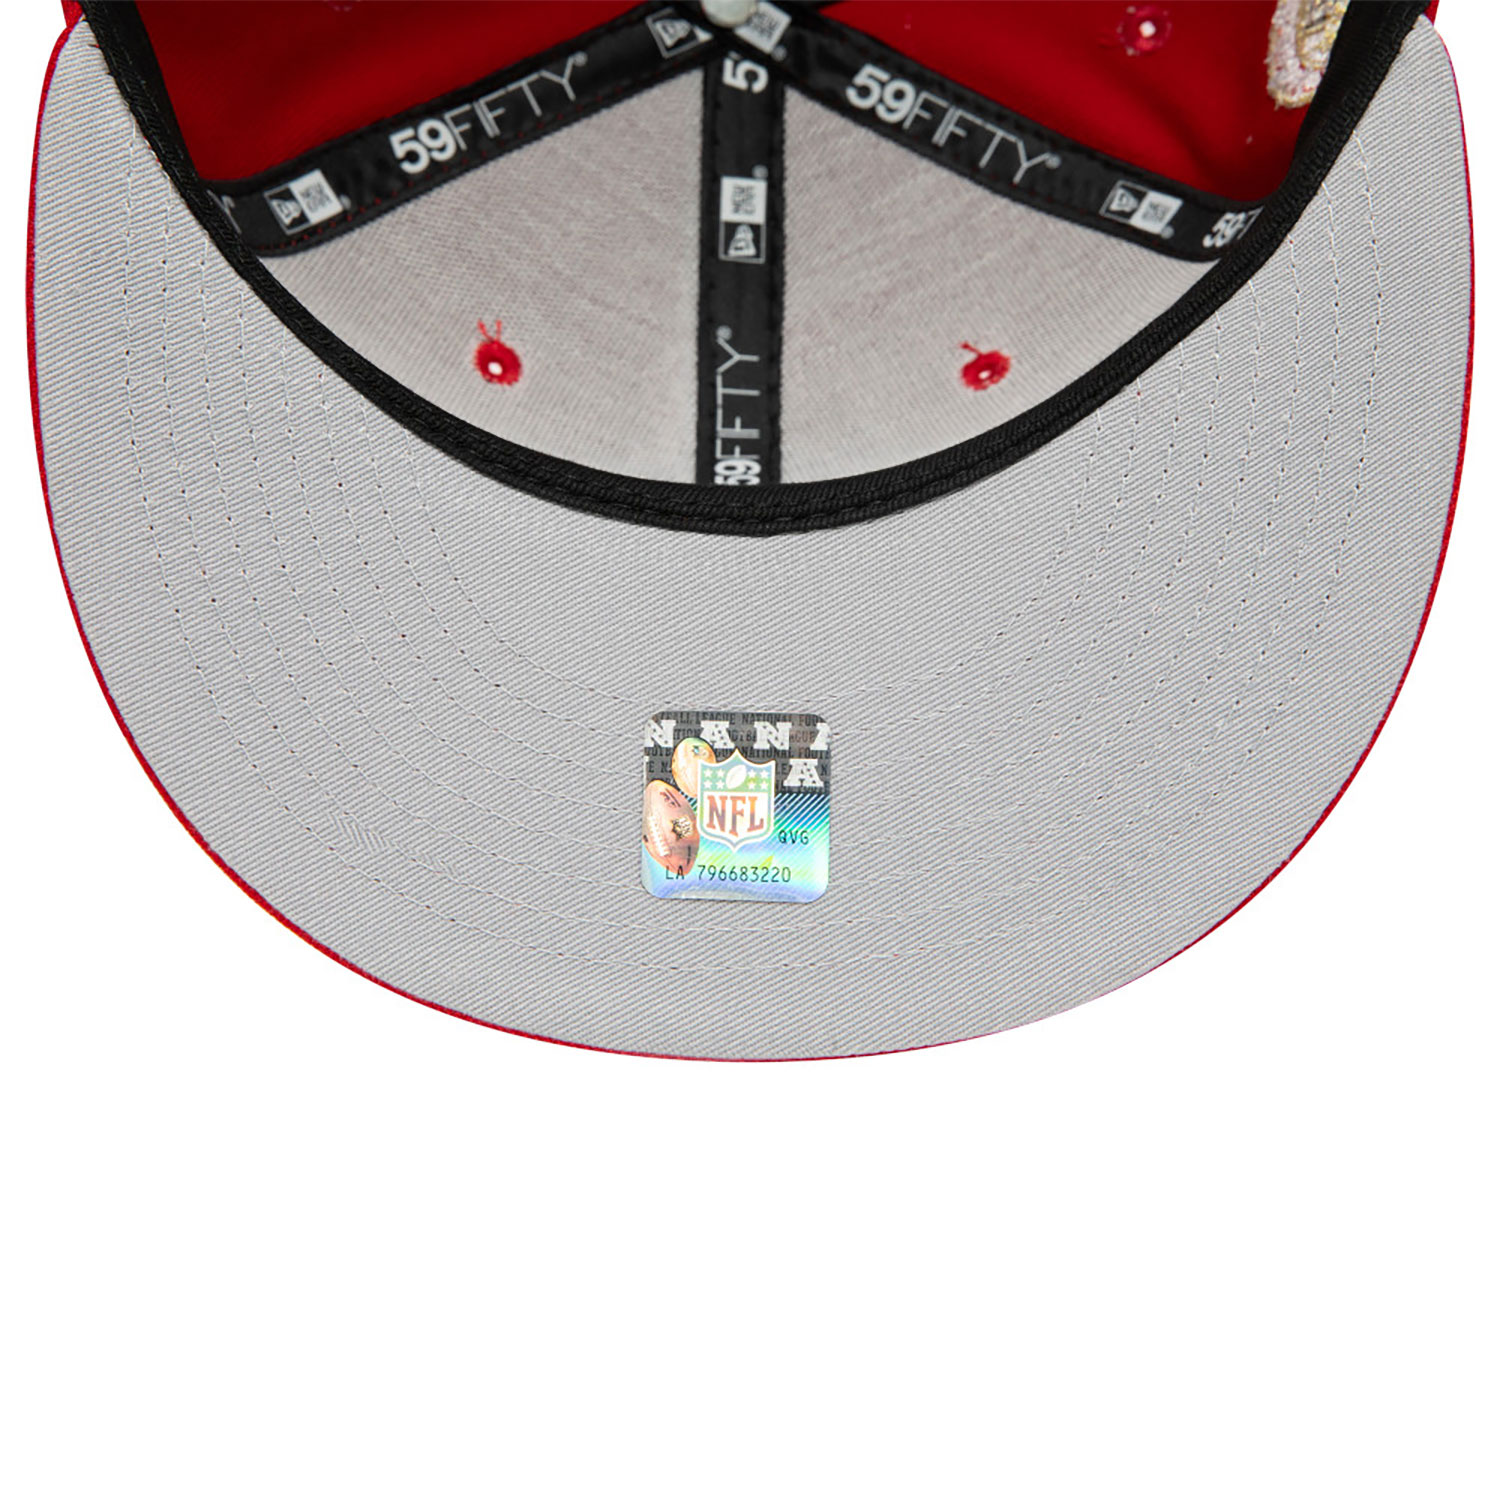 San Francisco 49ers NFL Red 59FIFTY Fitted Cap